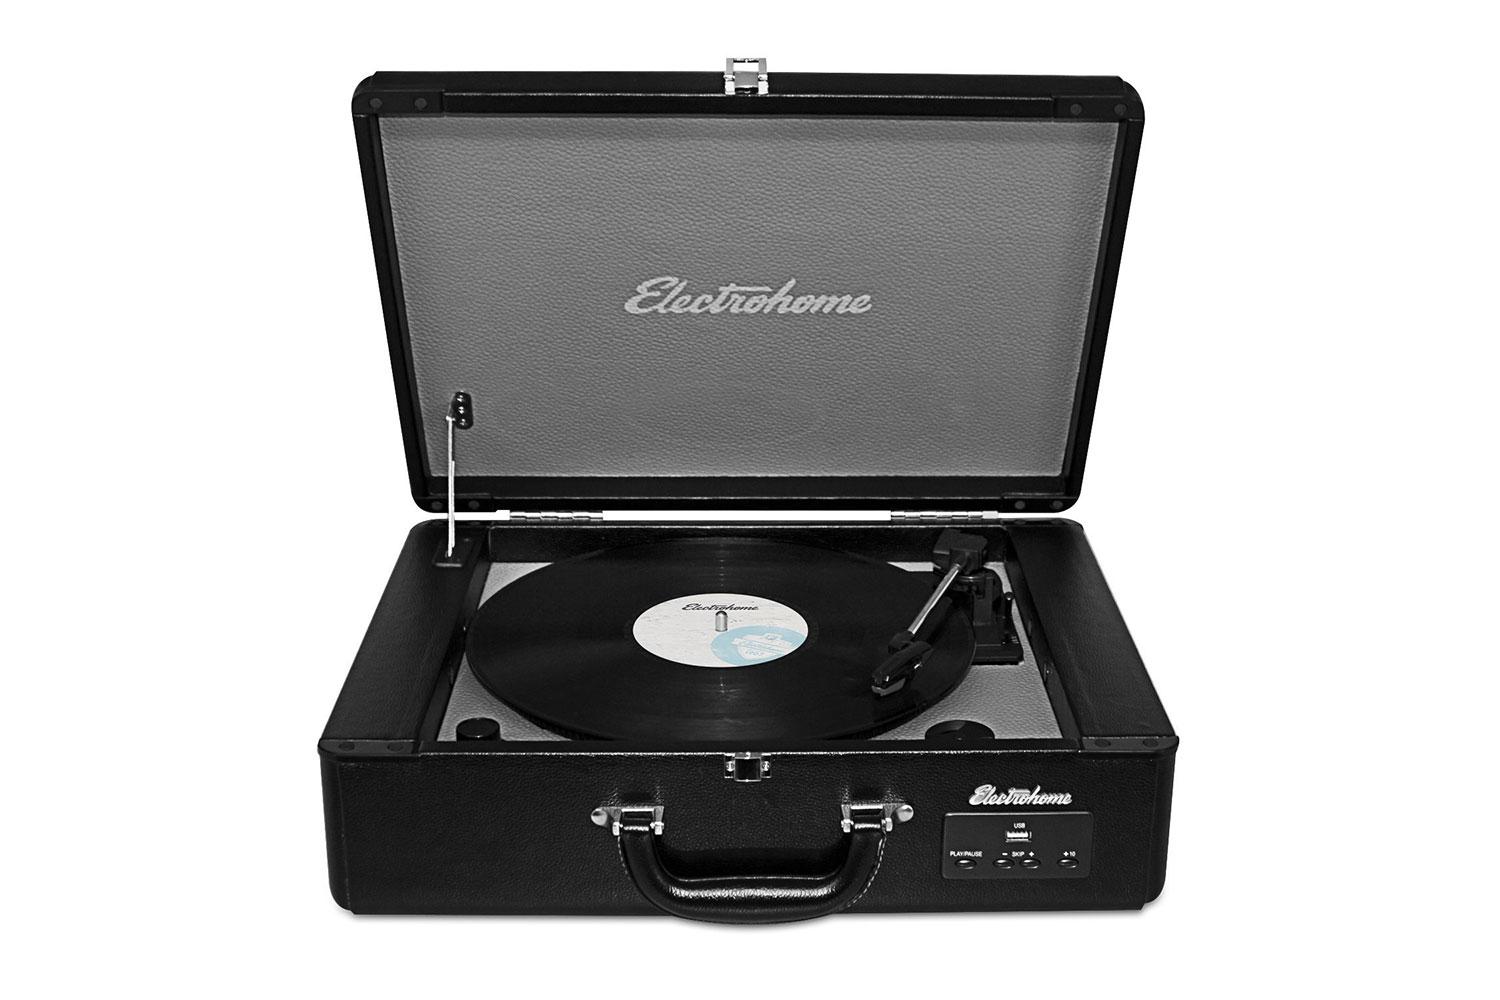 Electrohome Archer Vinyl Record Player front